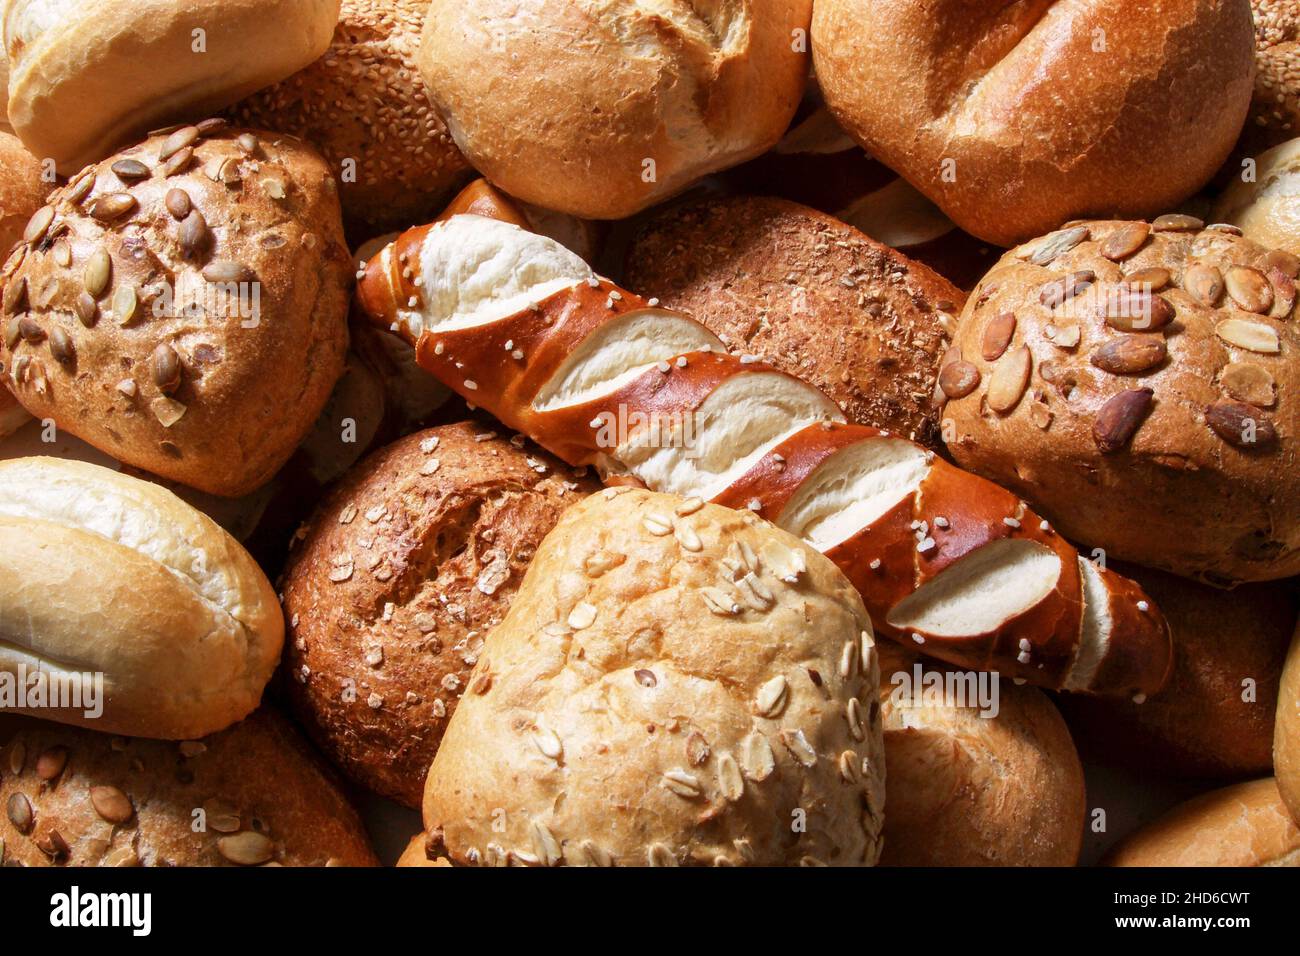 Bread selection in a bakery Stock Photo